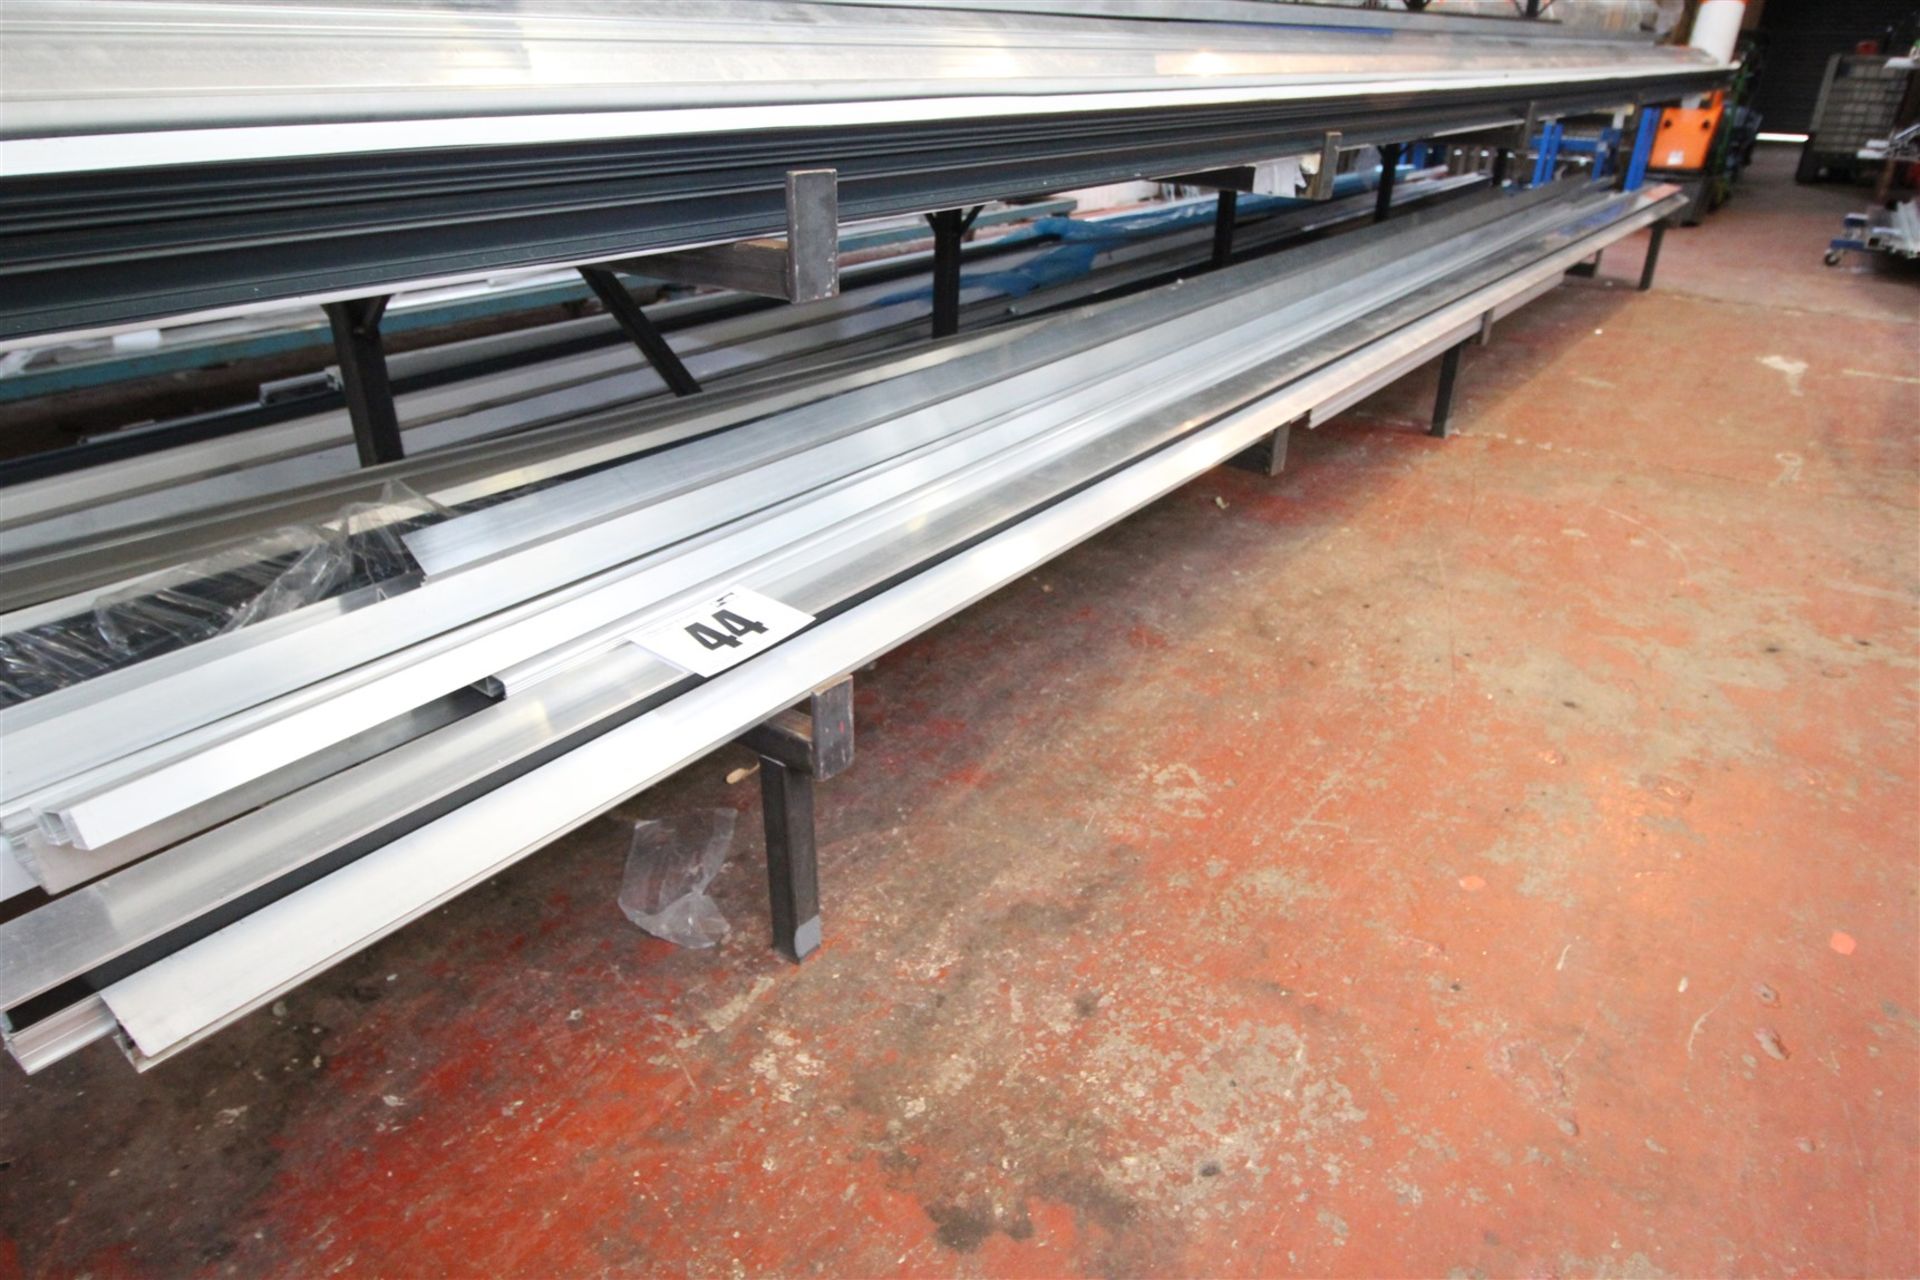 CONTENTS OF 28INCH WIDE BOTTOM SHELF OF RACK OF 5M LONG & SHORTER ALUMINIUM EXTRUSION.